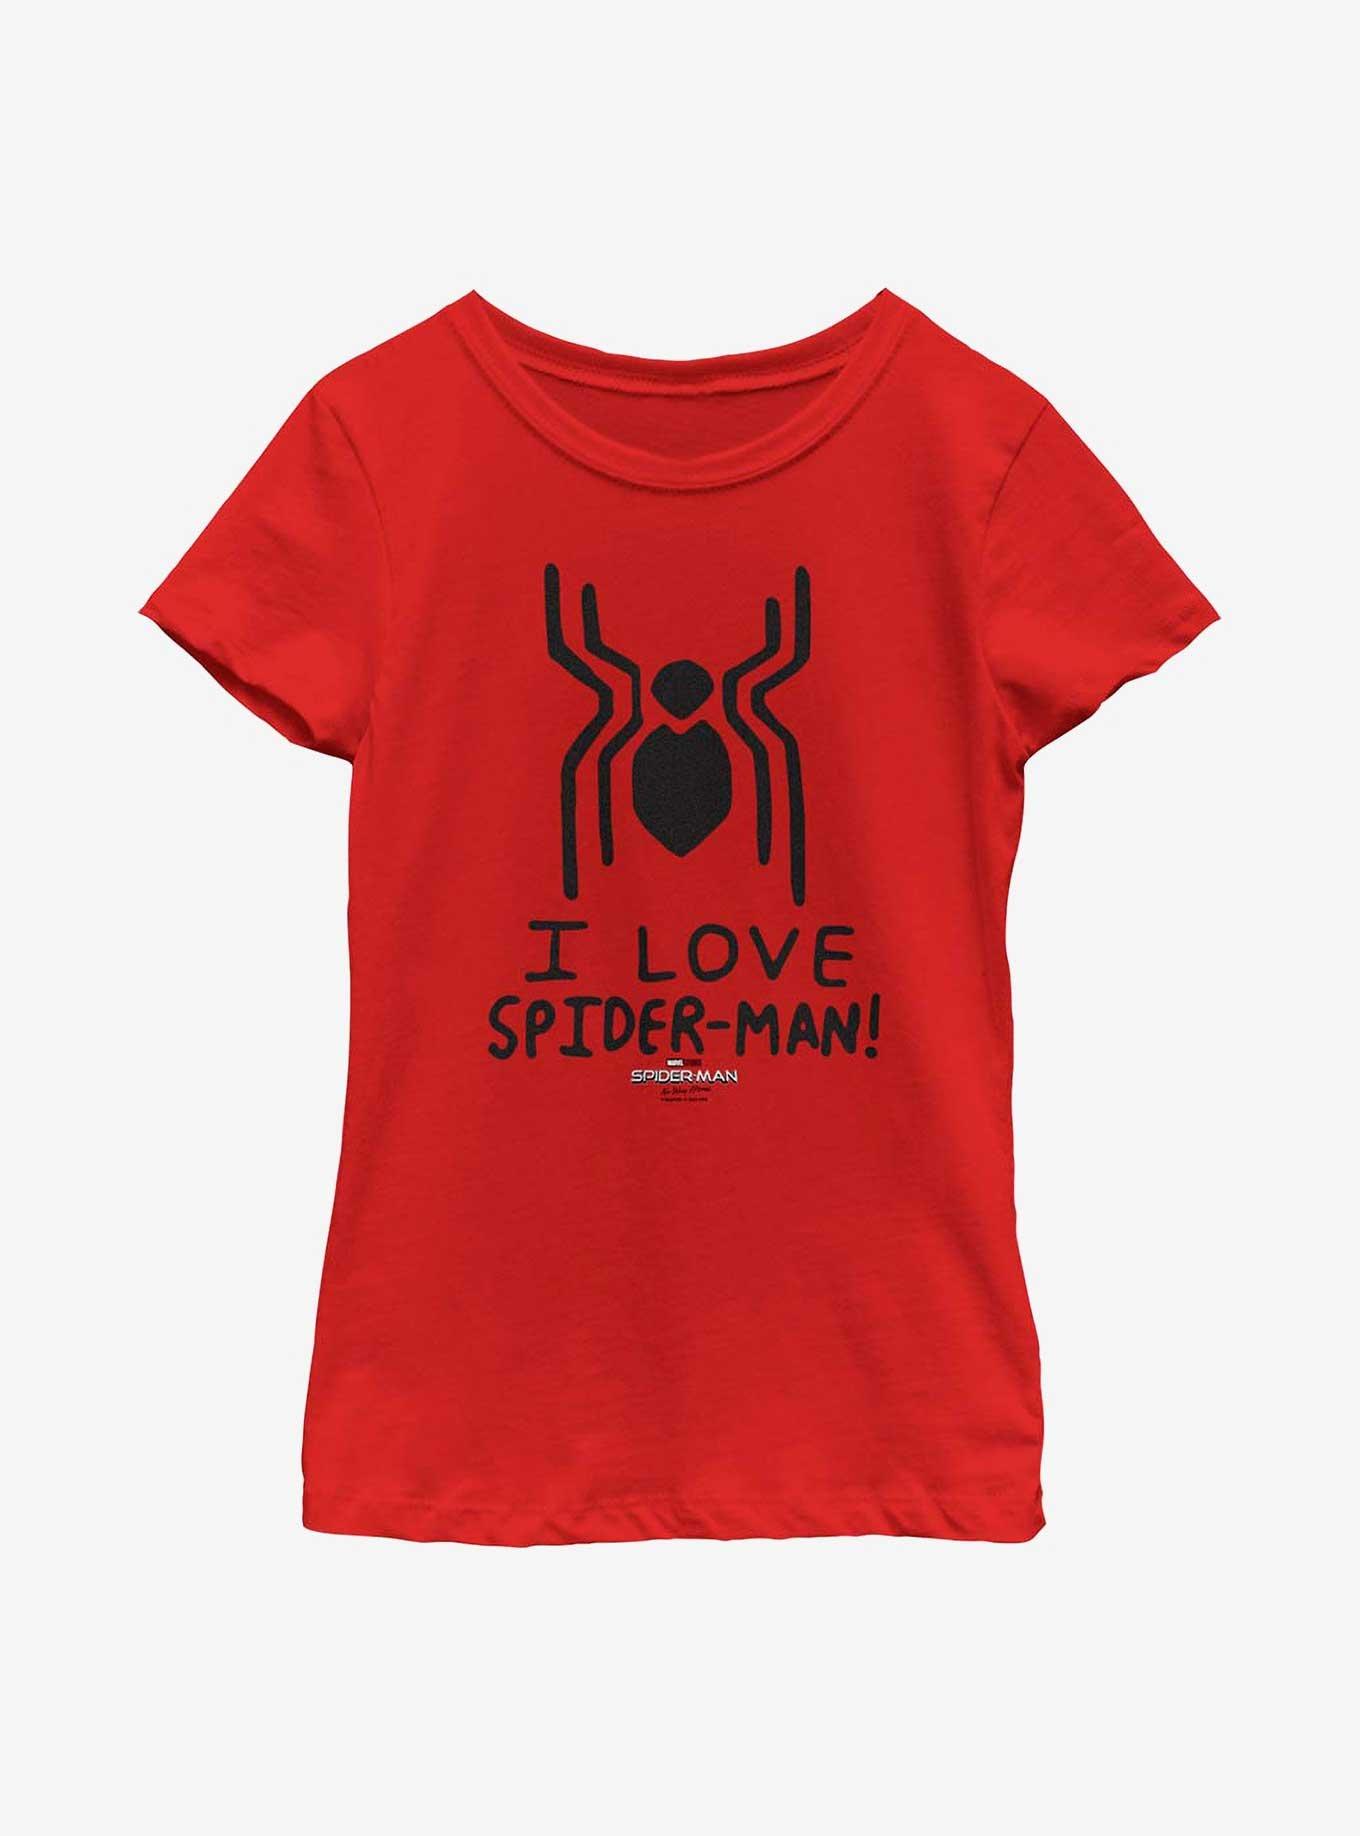 Marvel Spider-Man: No Way Home Spider Love Youth Girls T-Shirt, RED, hi-res